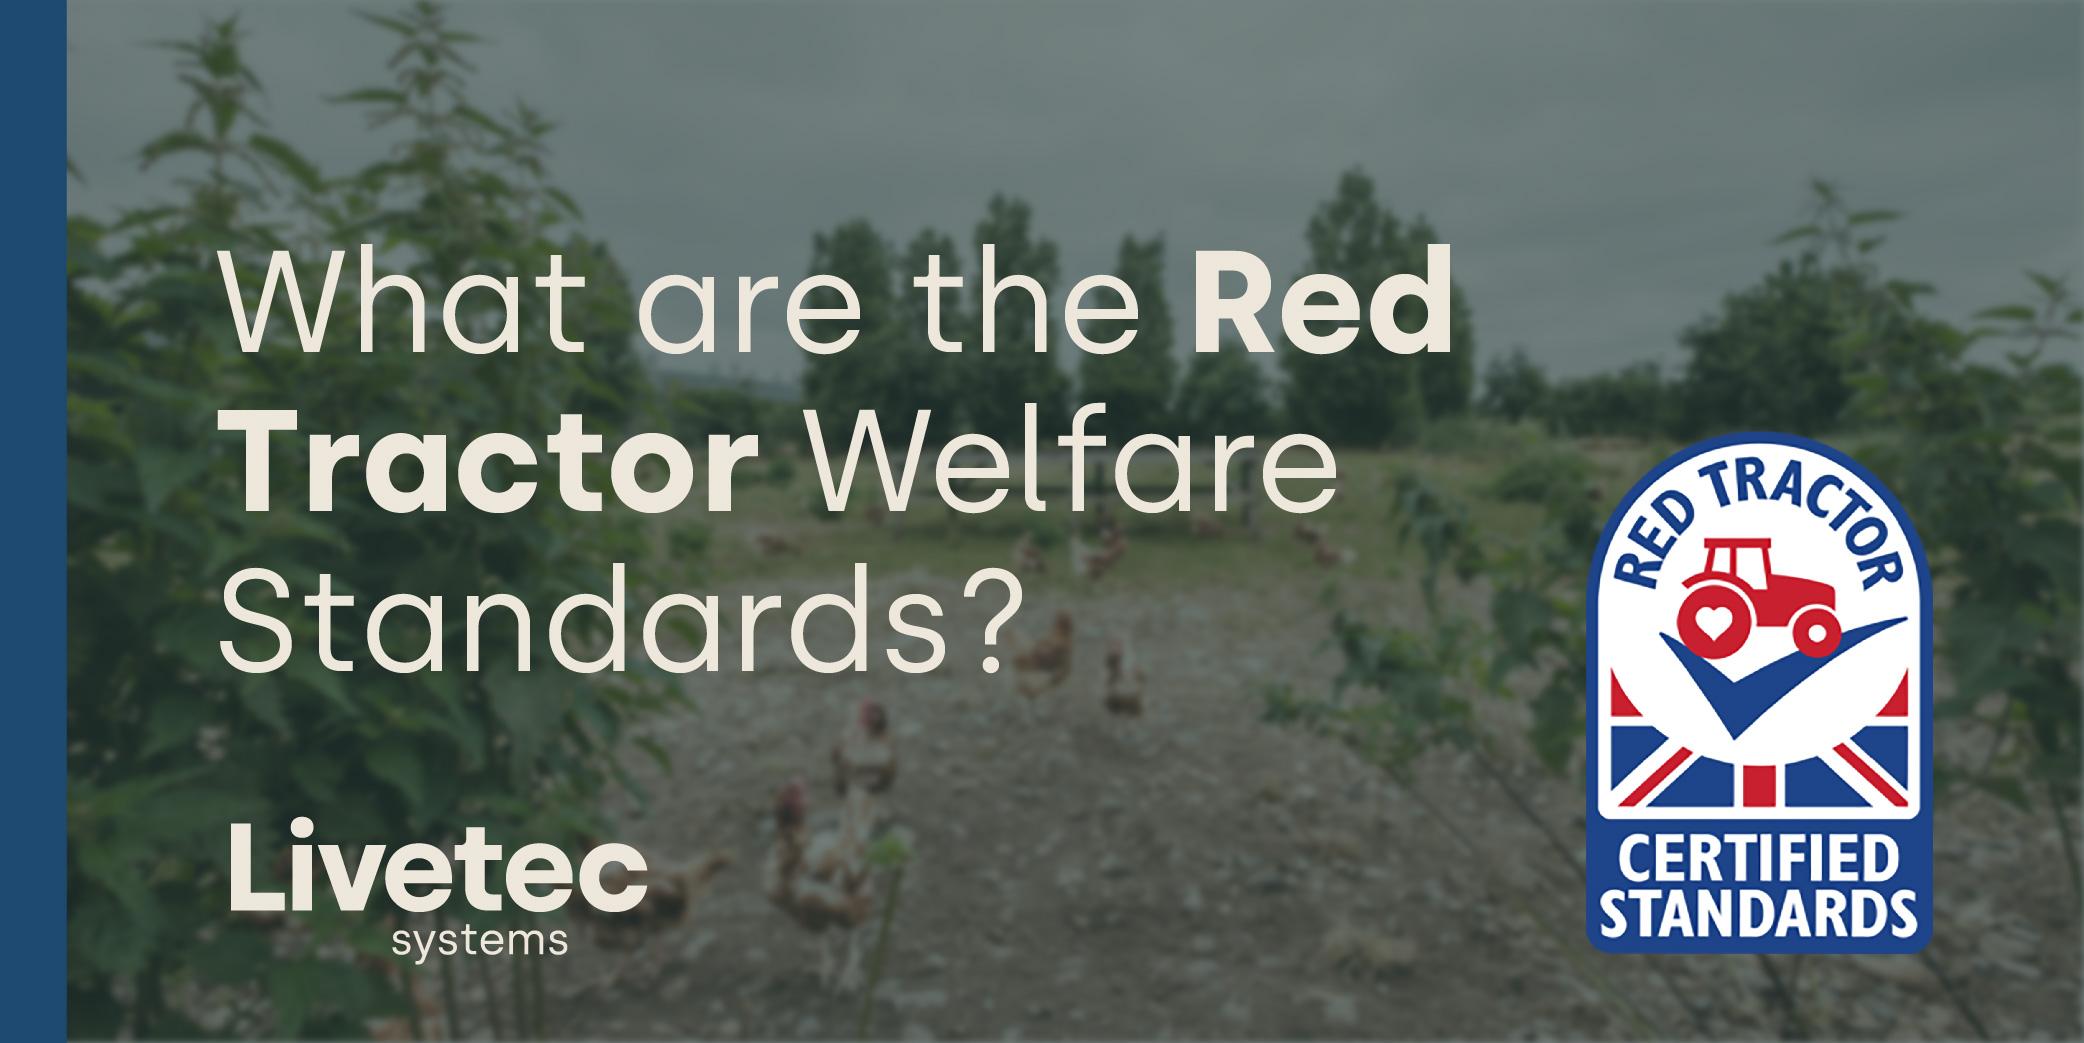 What are the Red Tractor Welfare Standards